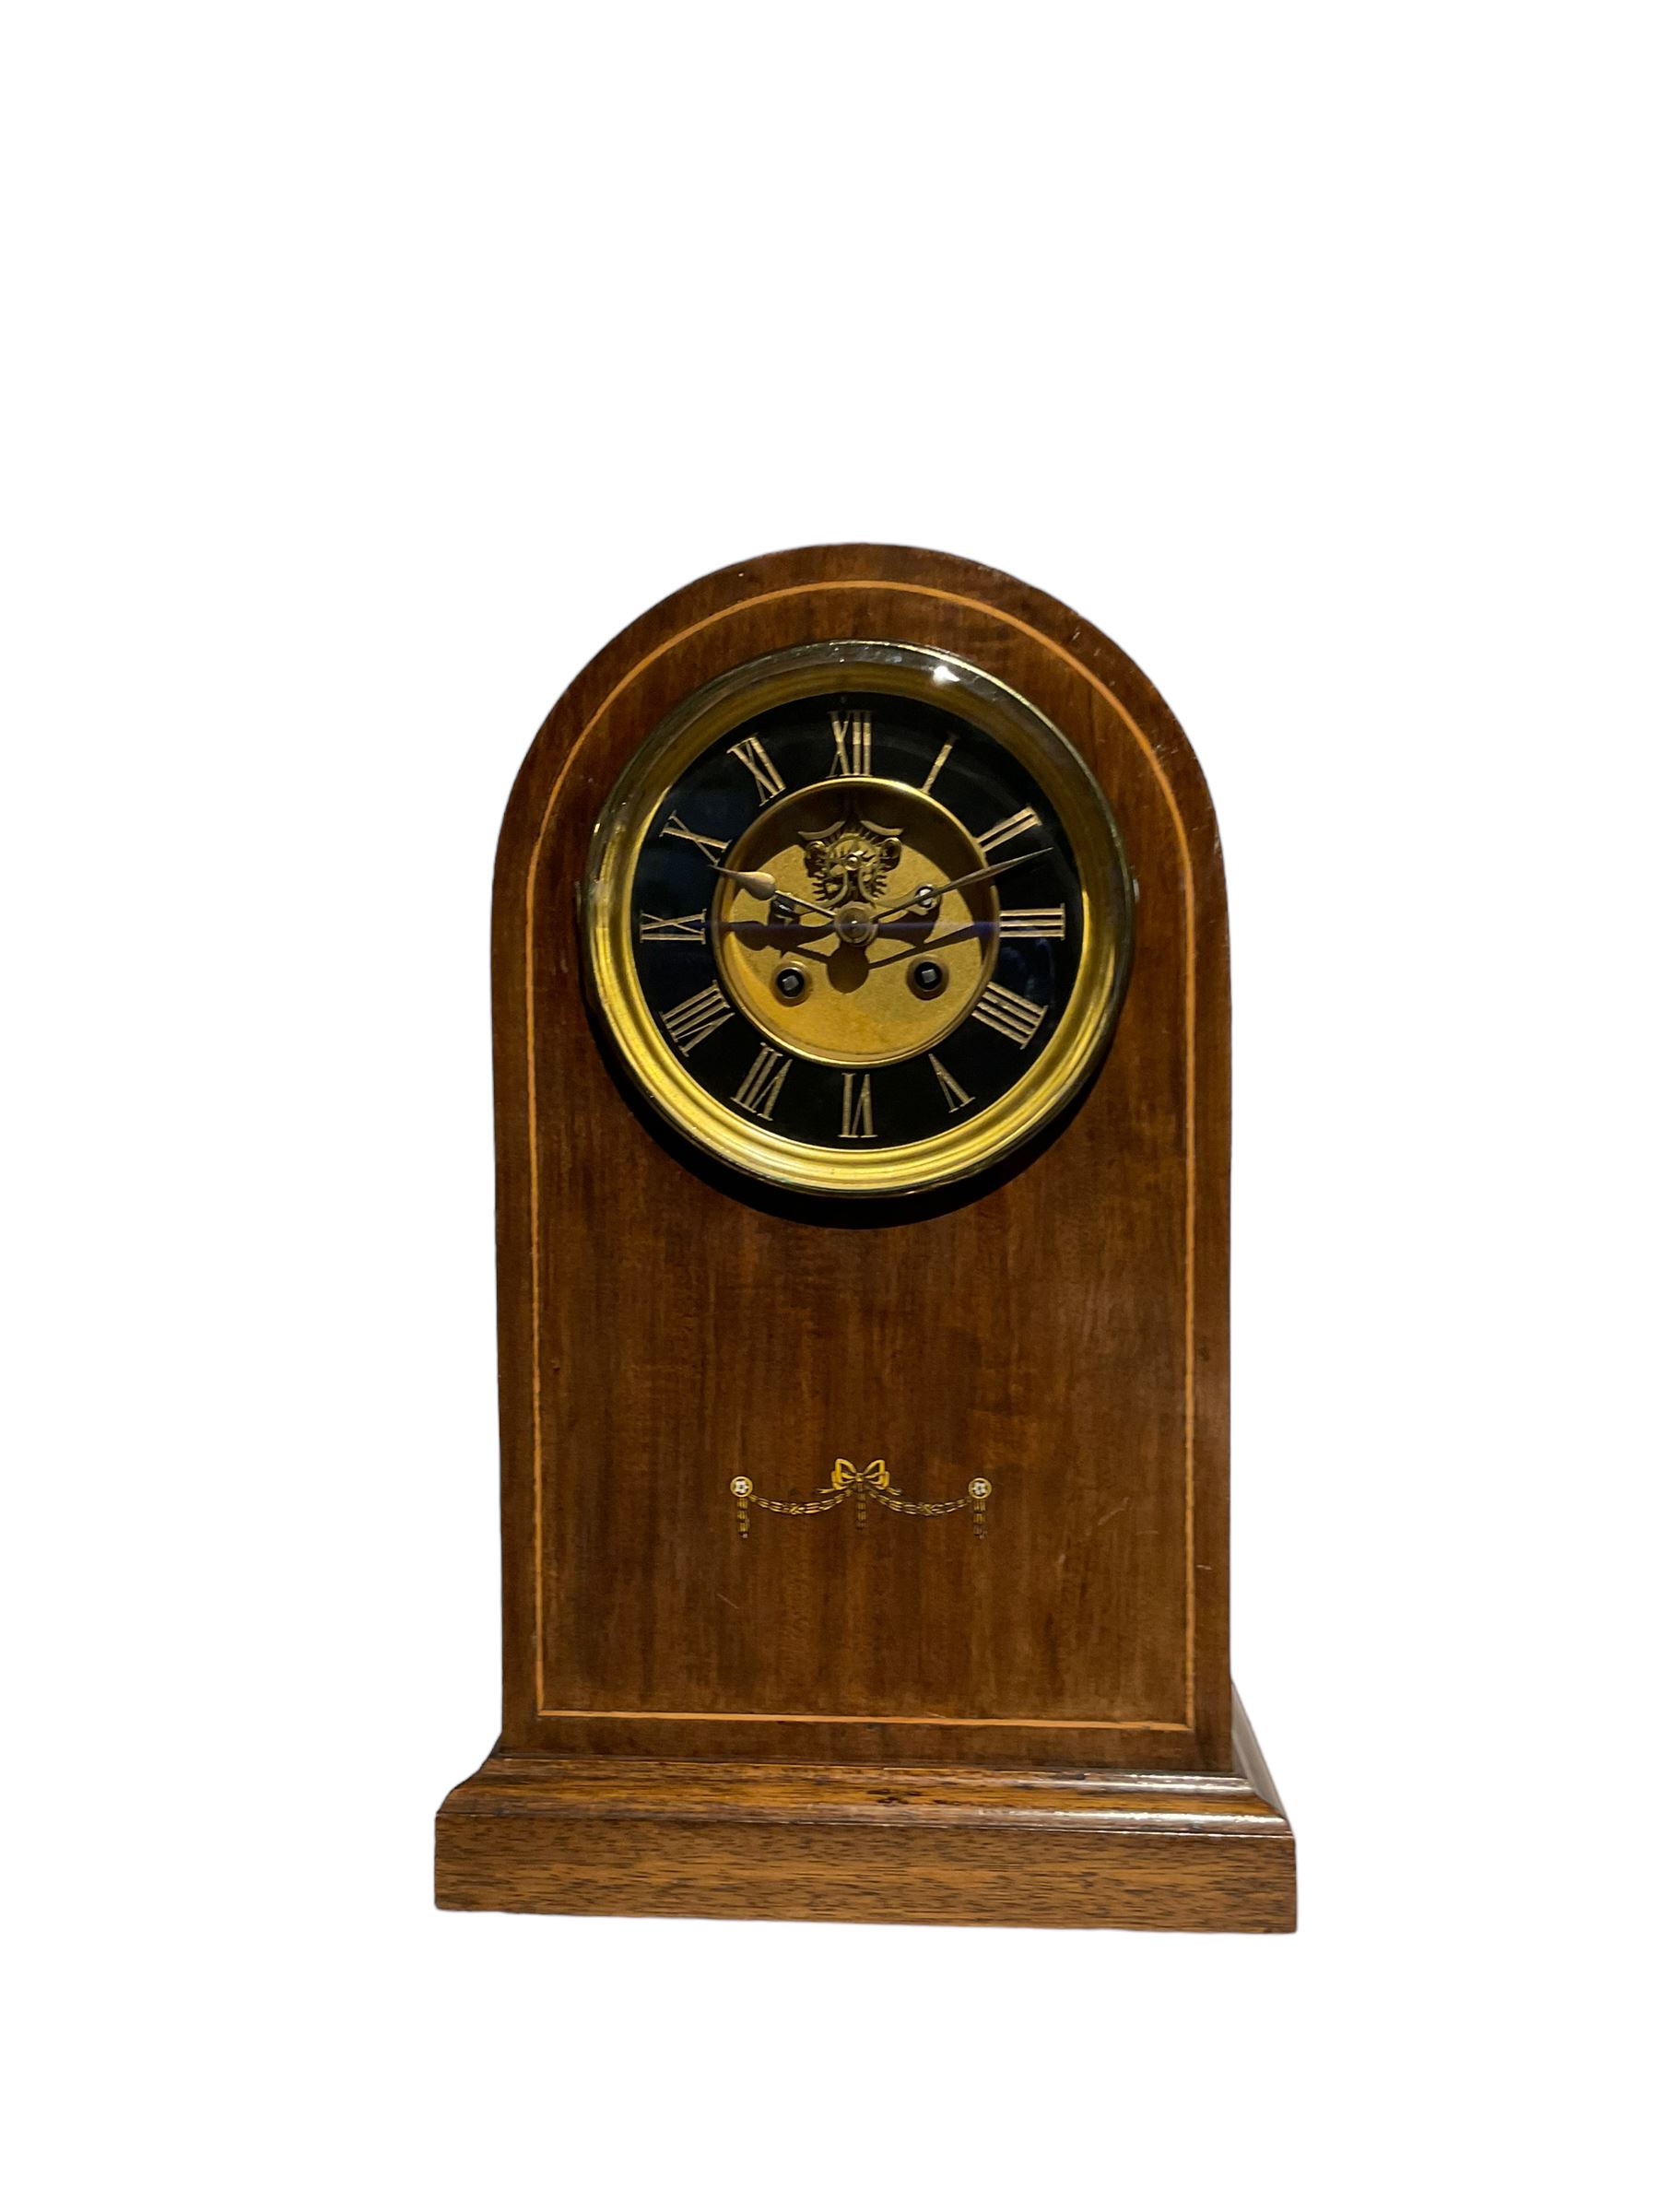 French - 19th-century 8-day mantle clock in a mahogany case